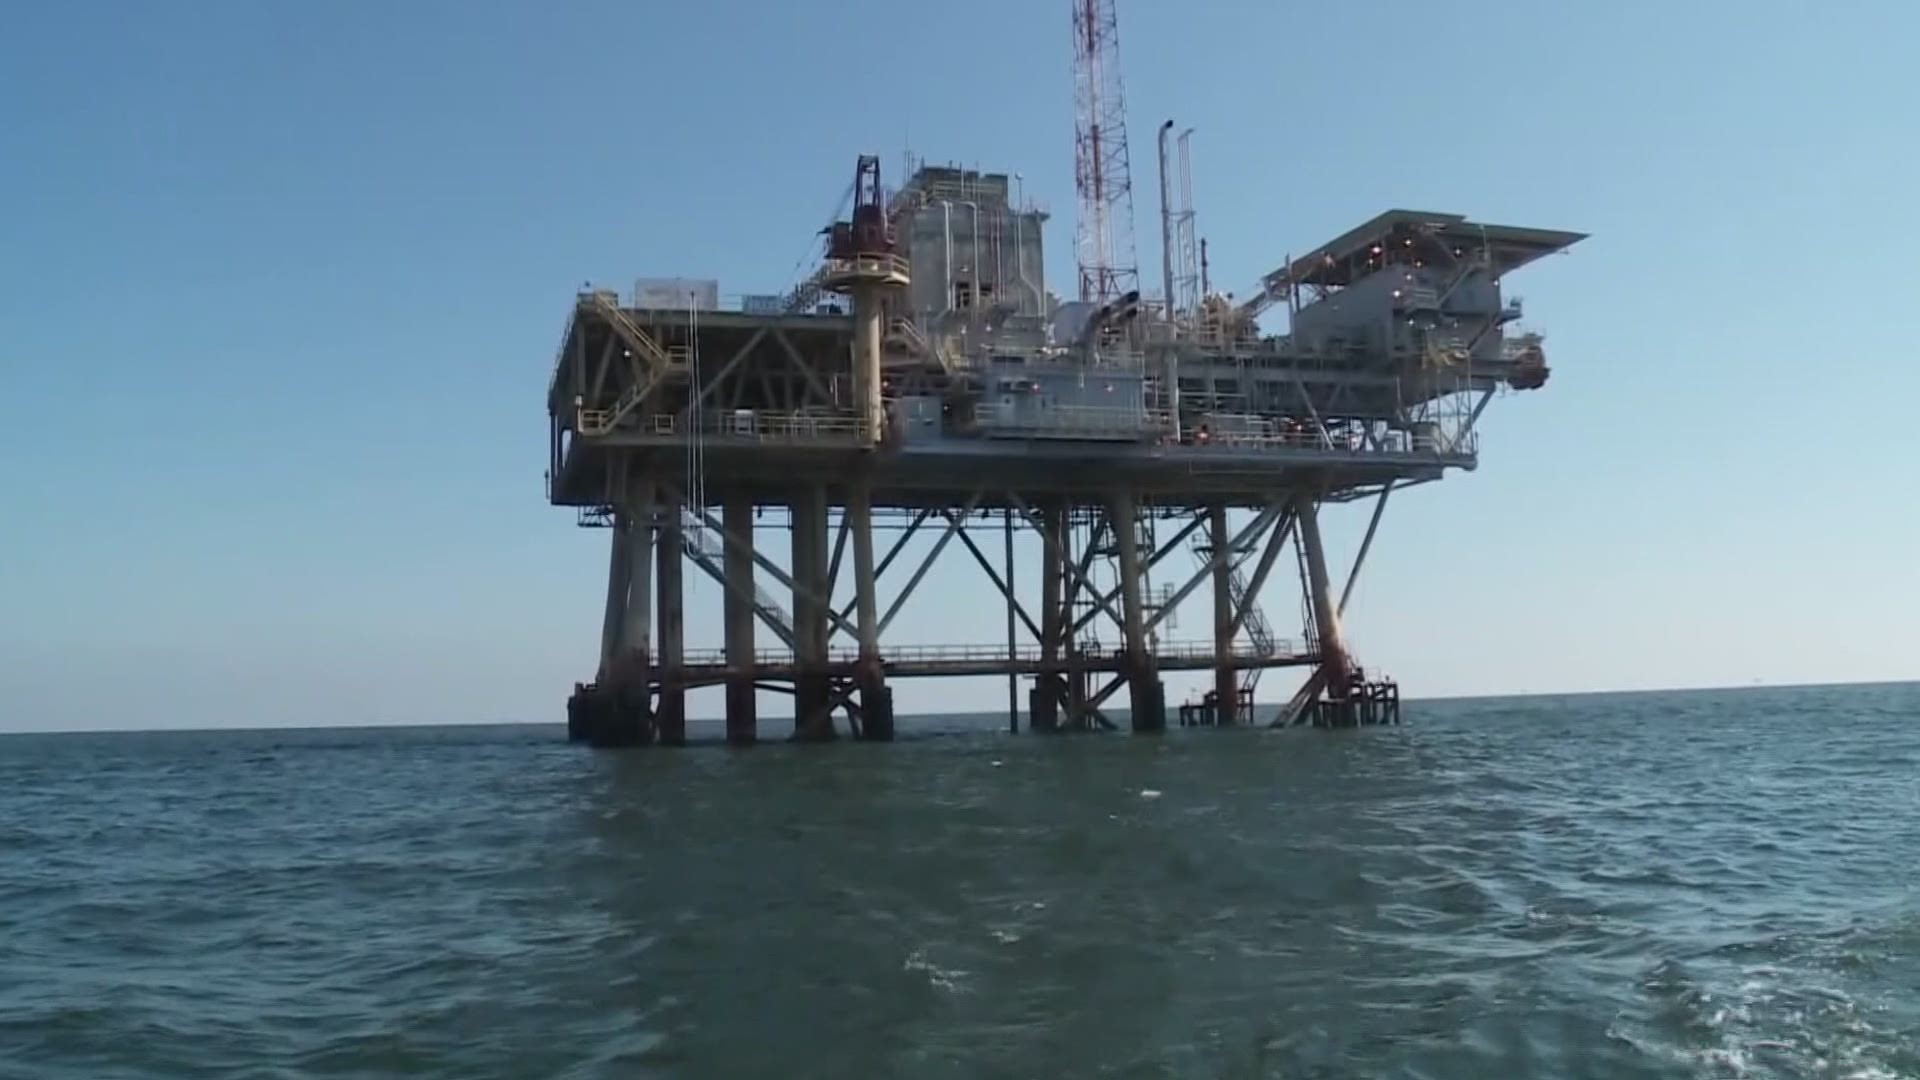 Oil and gas workers are concerned for their jobs after Biden announced a moratorium on new oil and gas leasing.